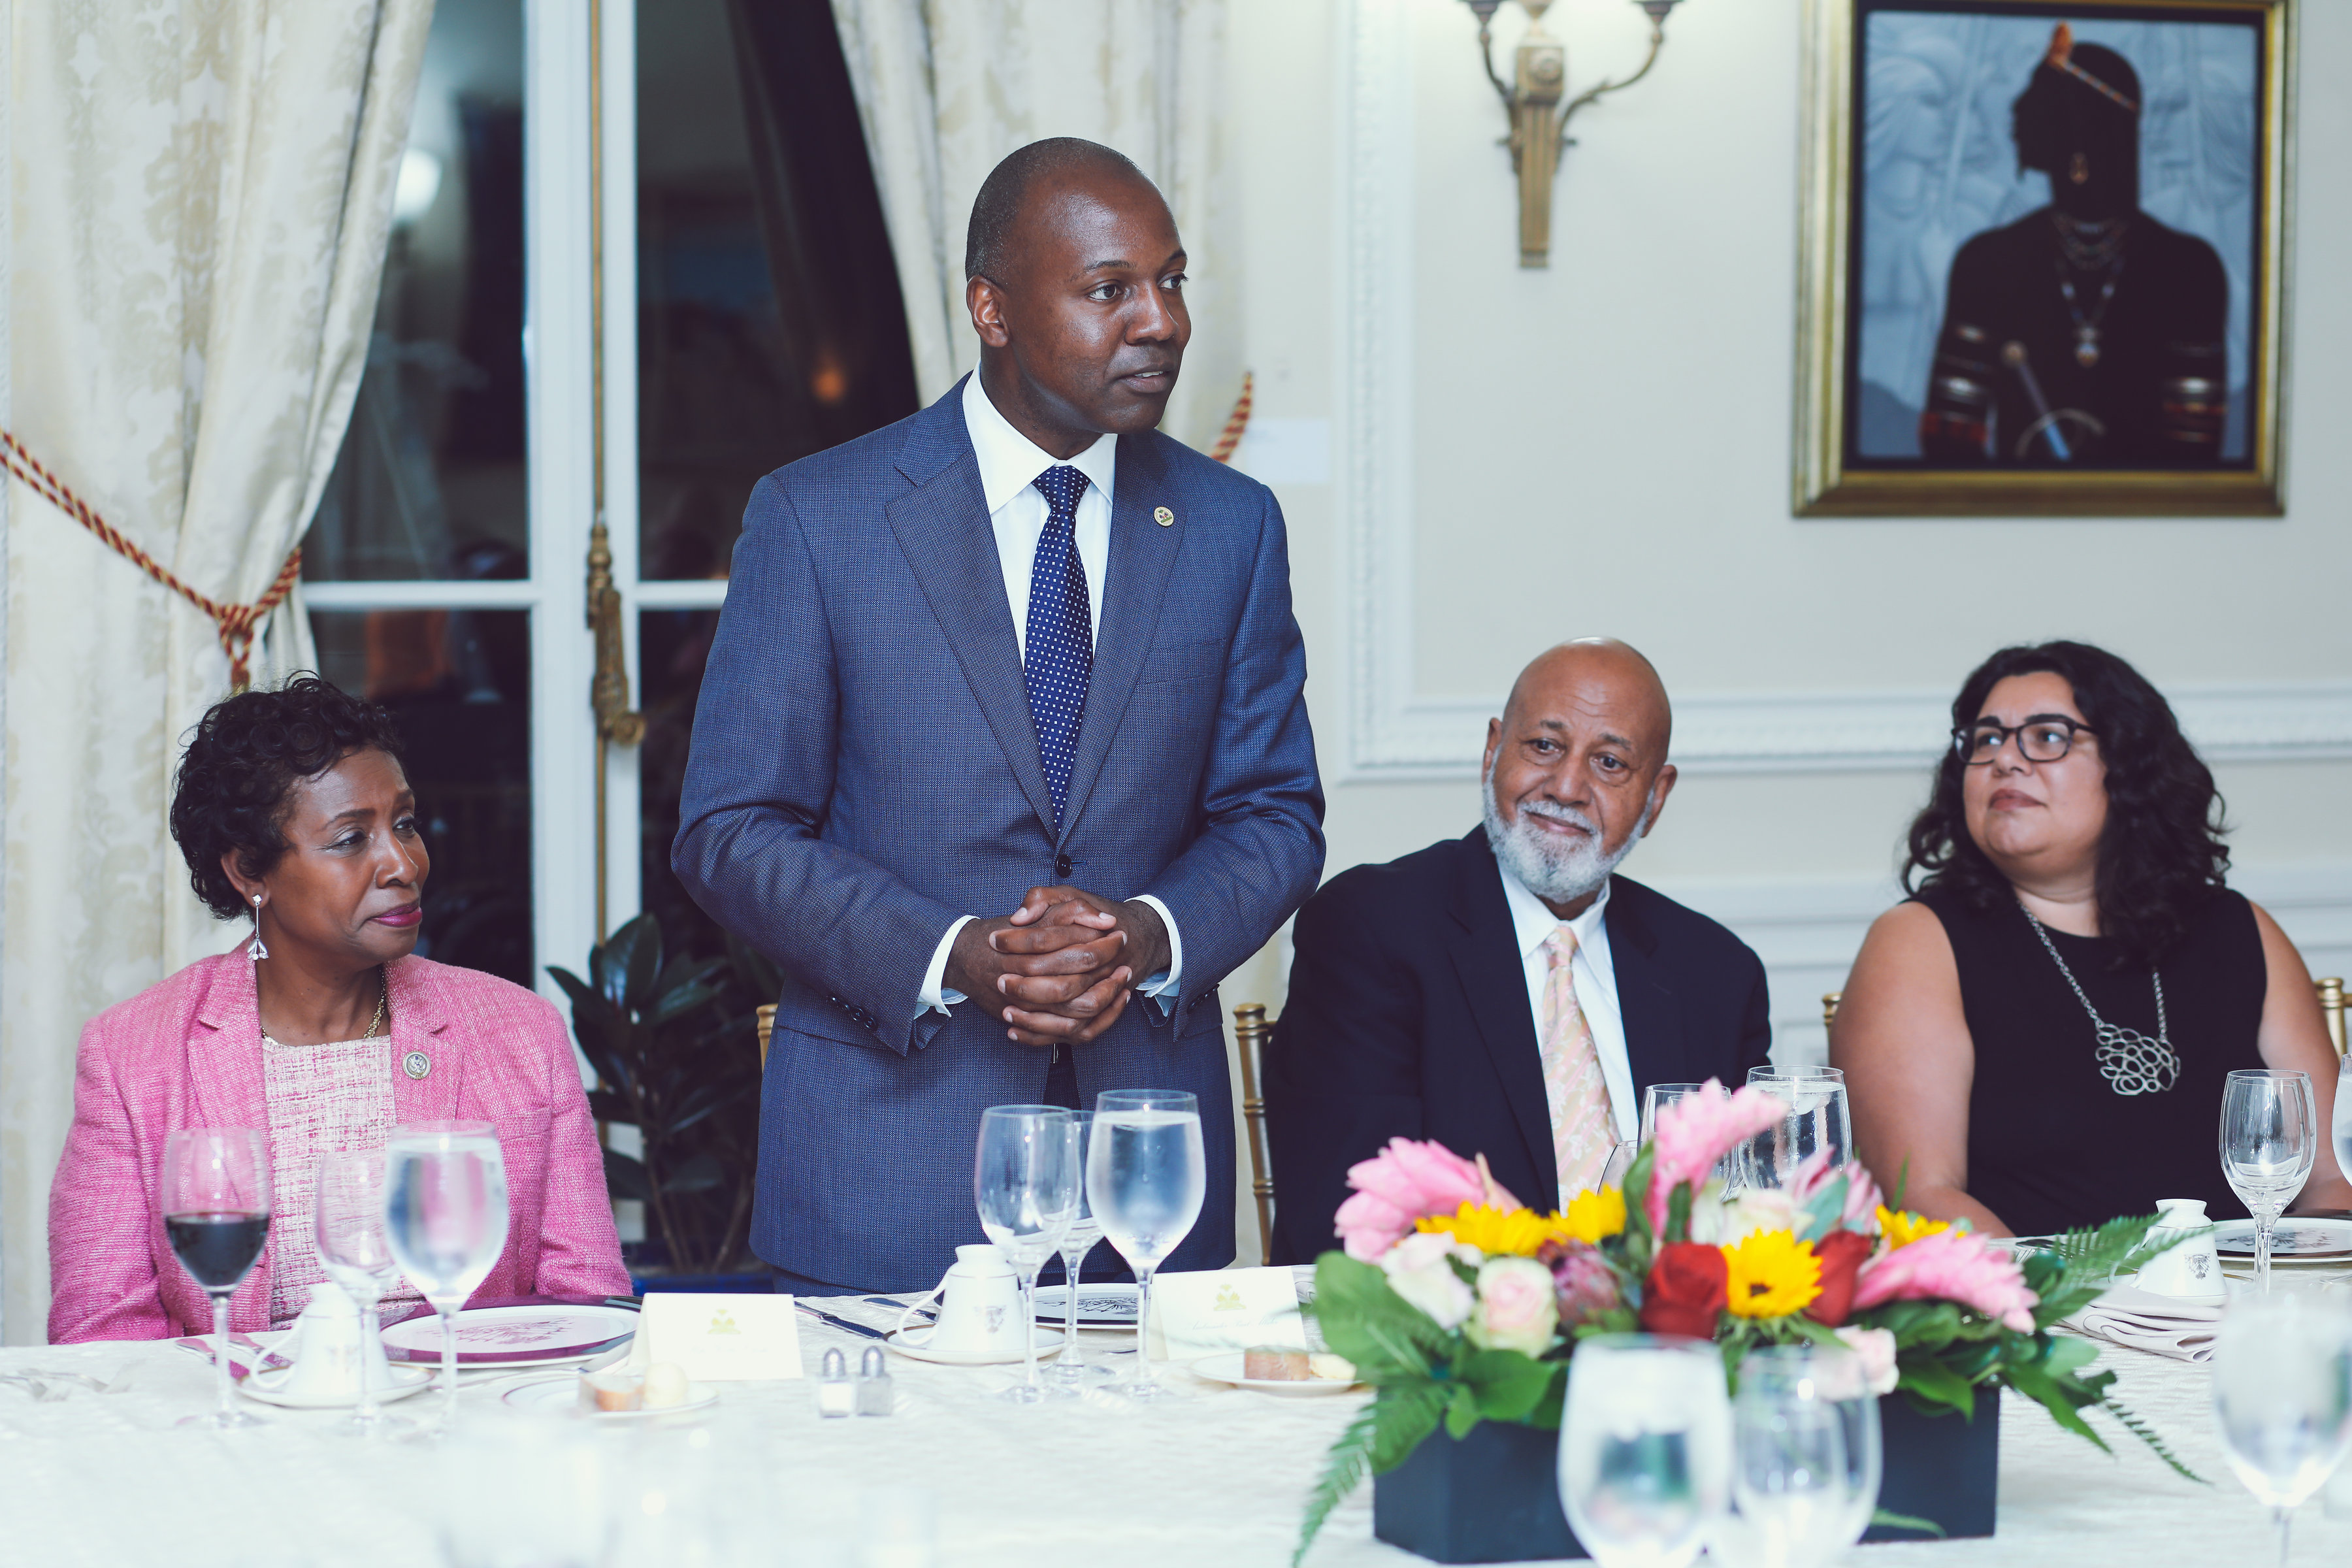 Embassy Hosts Congressional Dinner to Address the Renewal of TPS for Haitians